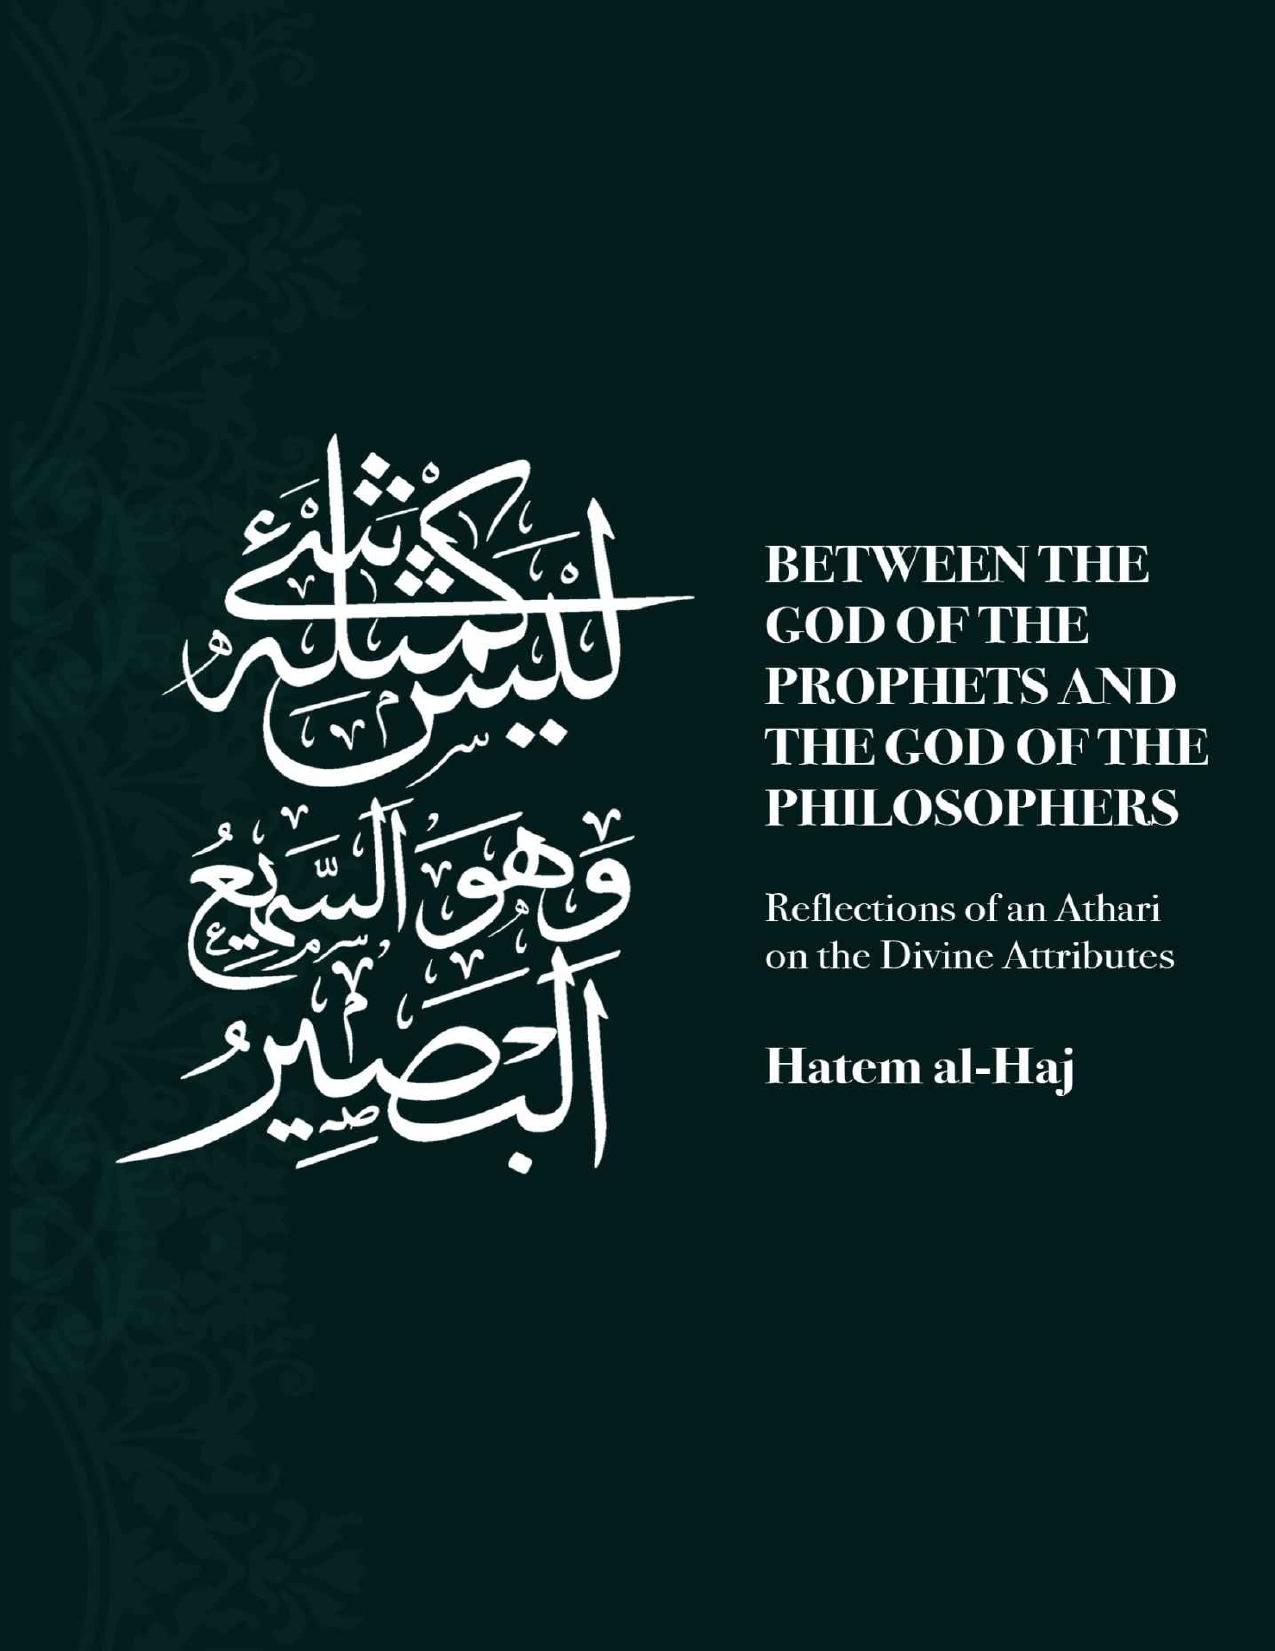 Between the God of the Prophets and the God of the Philosophers: Reflections of an Athari on the Divine Attributes by Hatem al-Haj